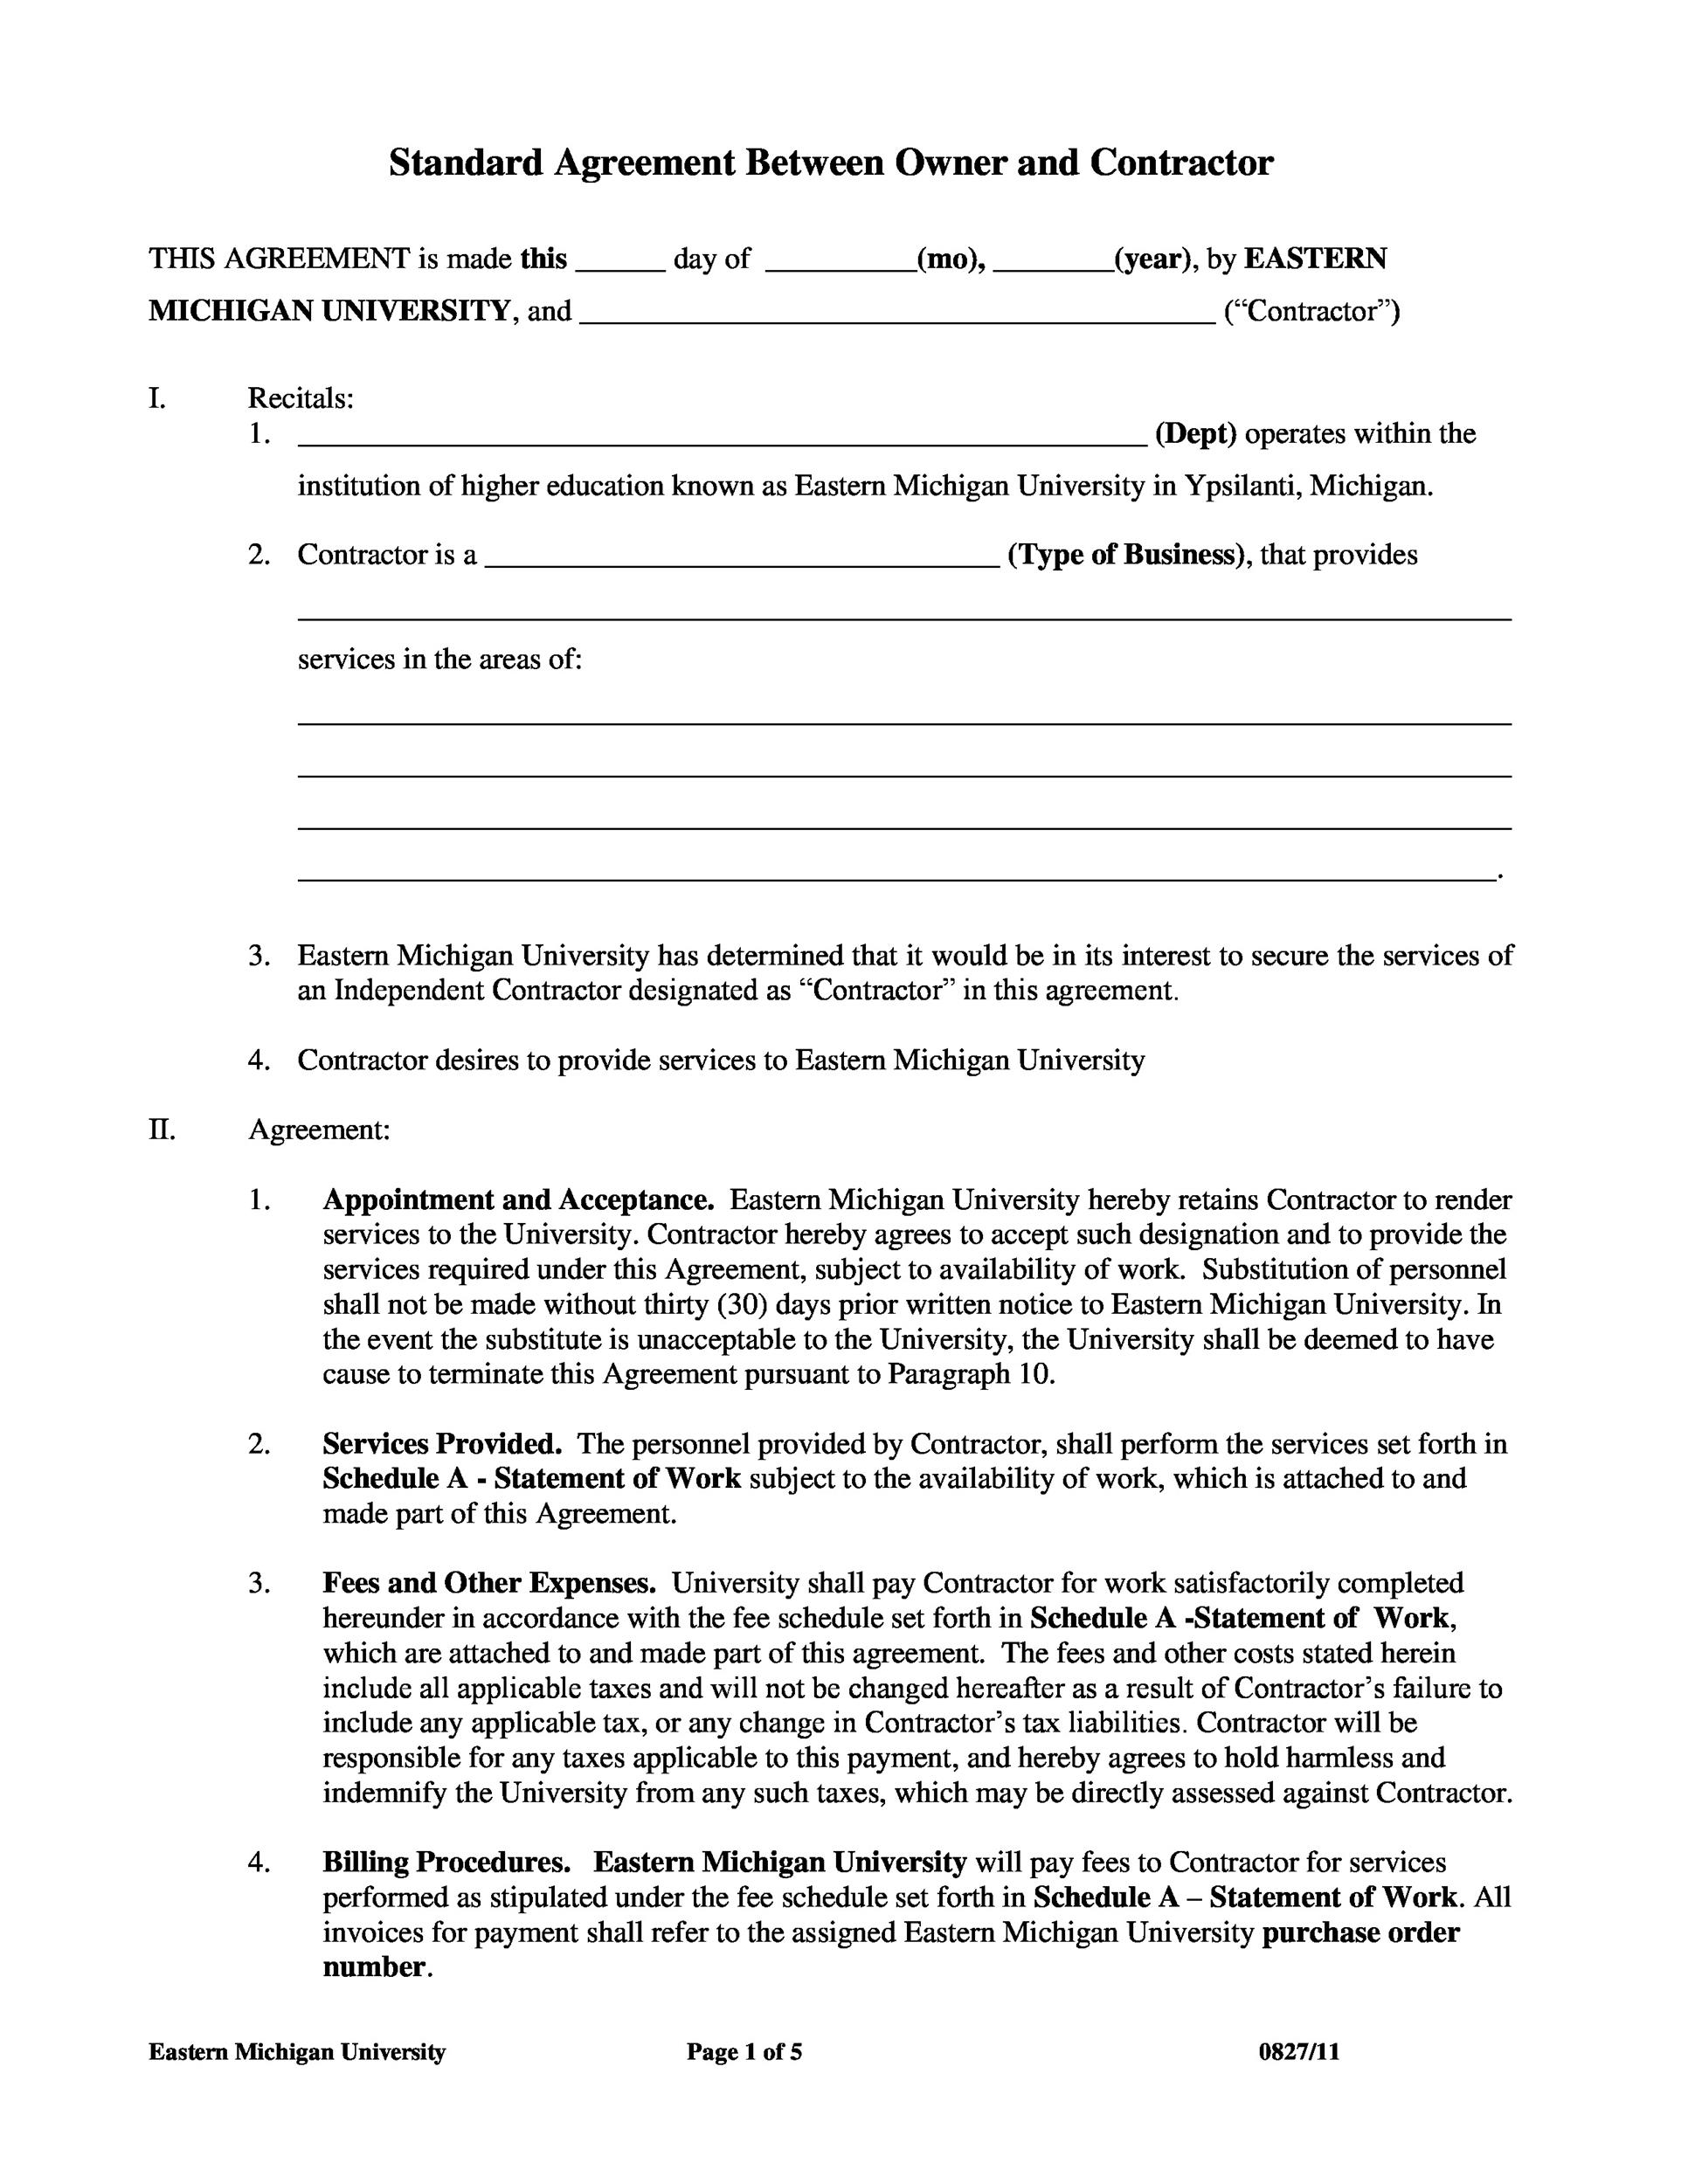 50+ FREE Independent Contractor Agreement Forms & Templates